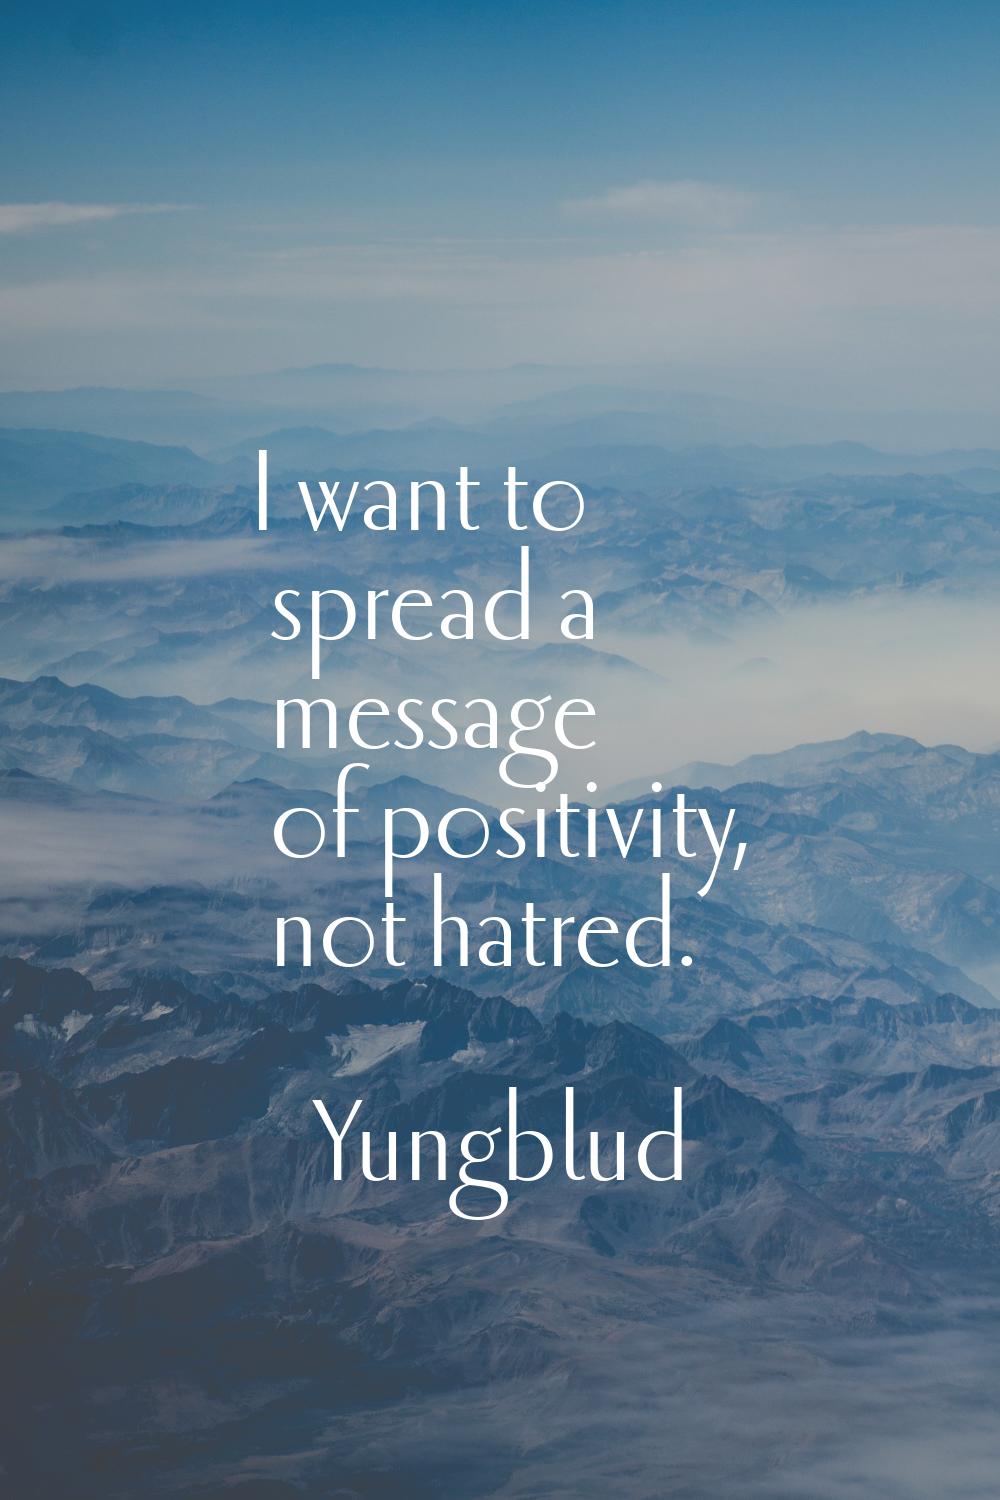 I want to spread a message of positivity, not hatred.